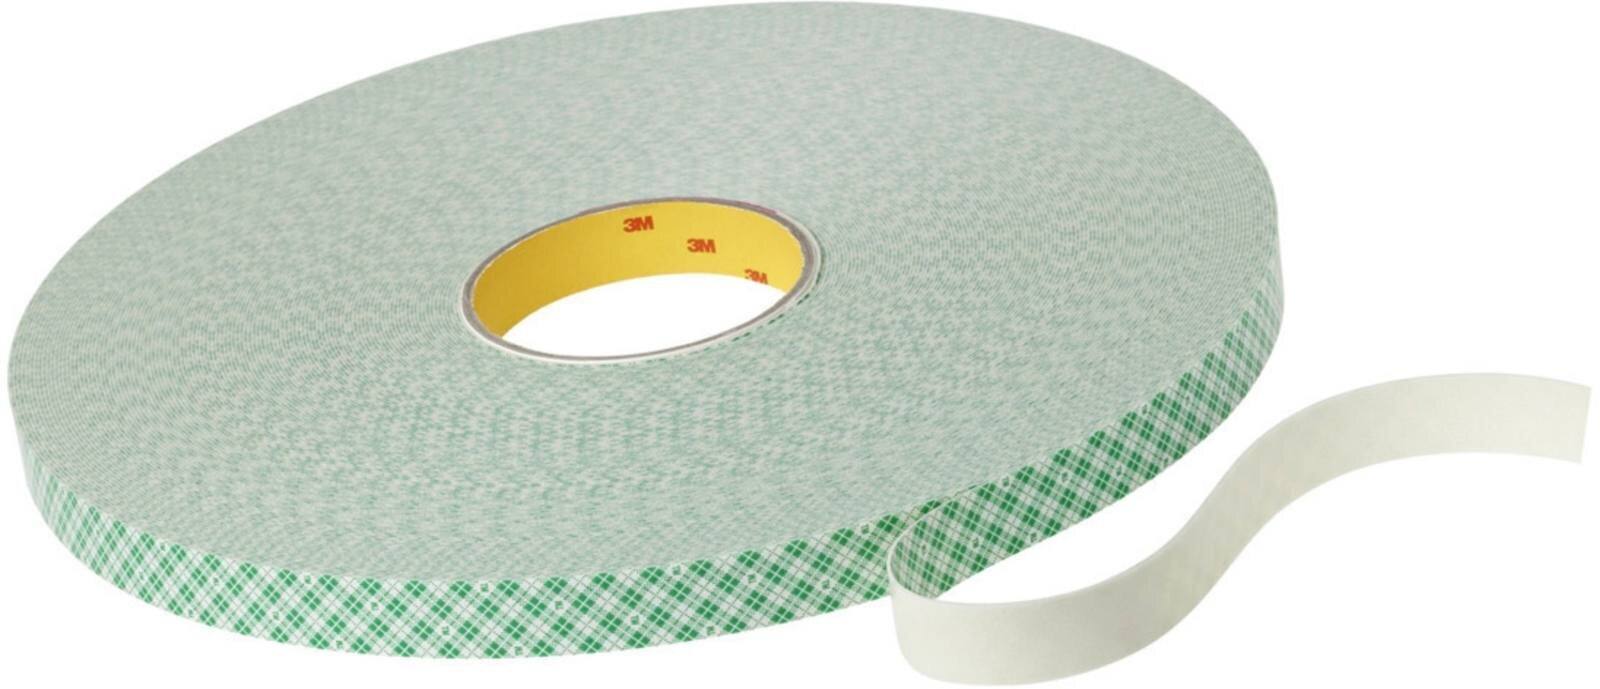 3M PU foam adhesive tape with acrylic adhesive 4032, beige, 50 mm x 66 m, 0.8 mm